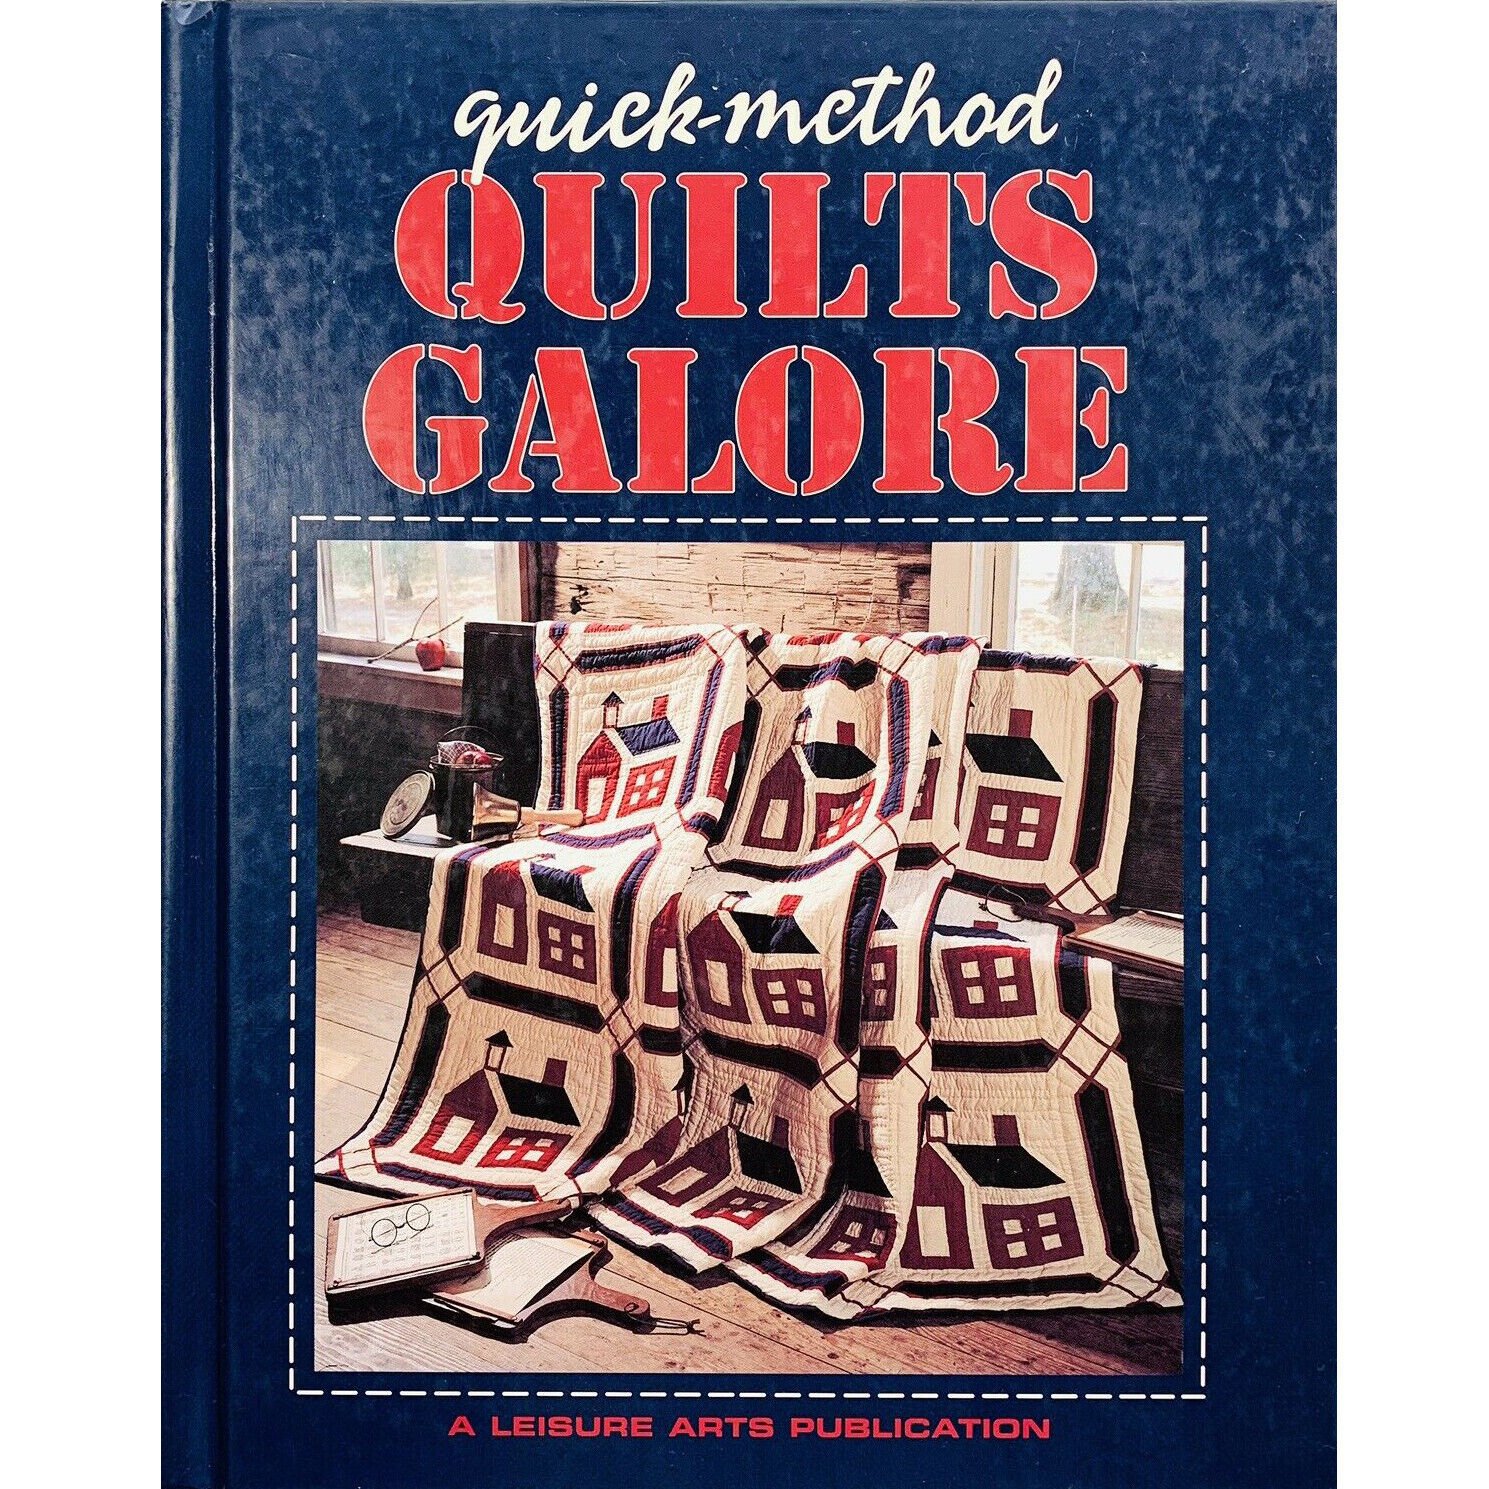 Quick Method Quits Galore 30+ Quilt Projects from Leisure Arts Hardcover